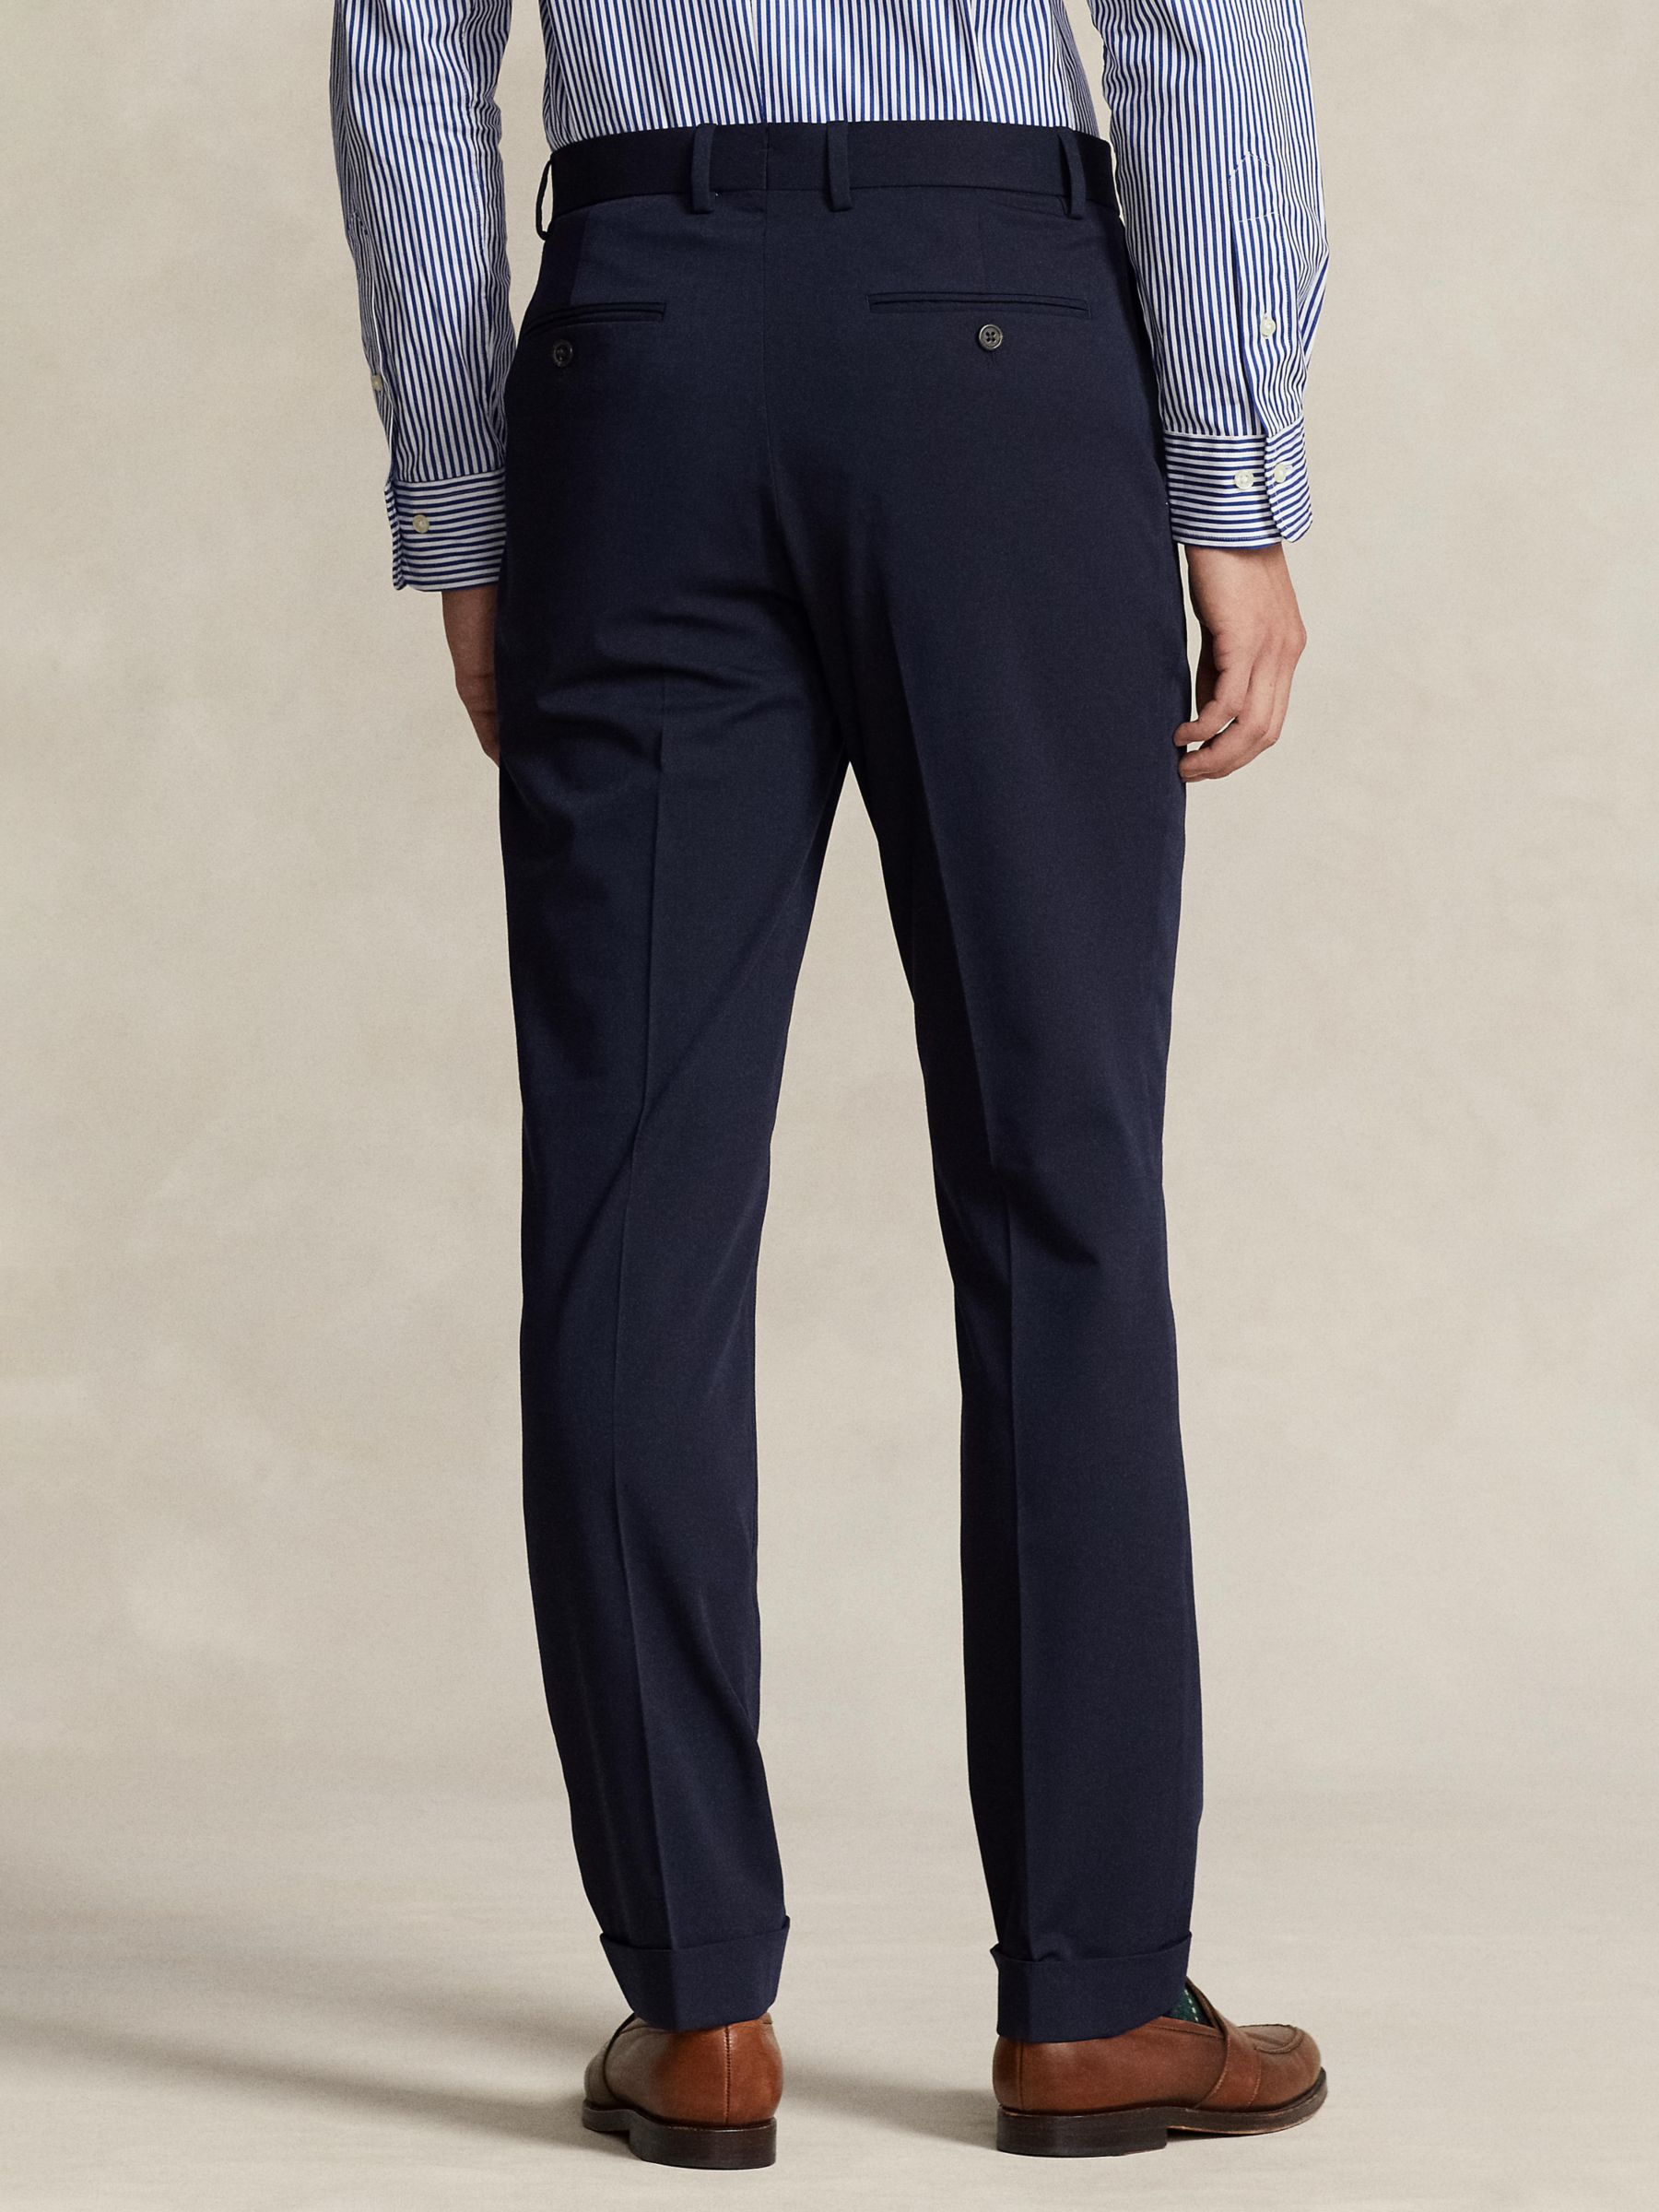 Buy Polo Ralph Lauren Performance Stretch Twill Suit Trouser, Navy Online at johnlewis.com